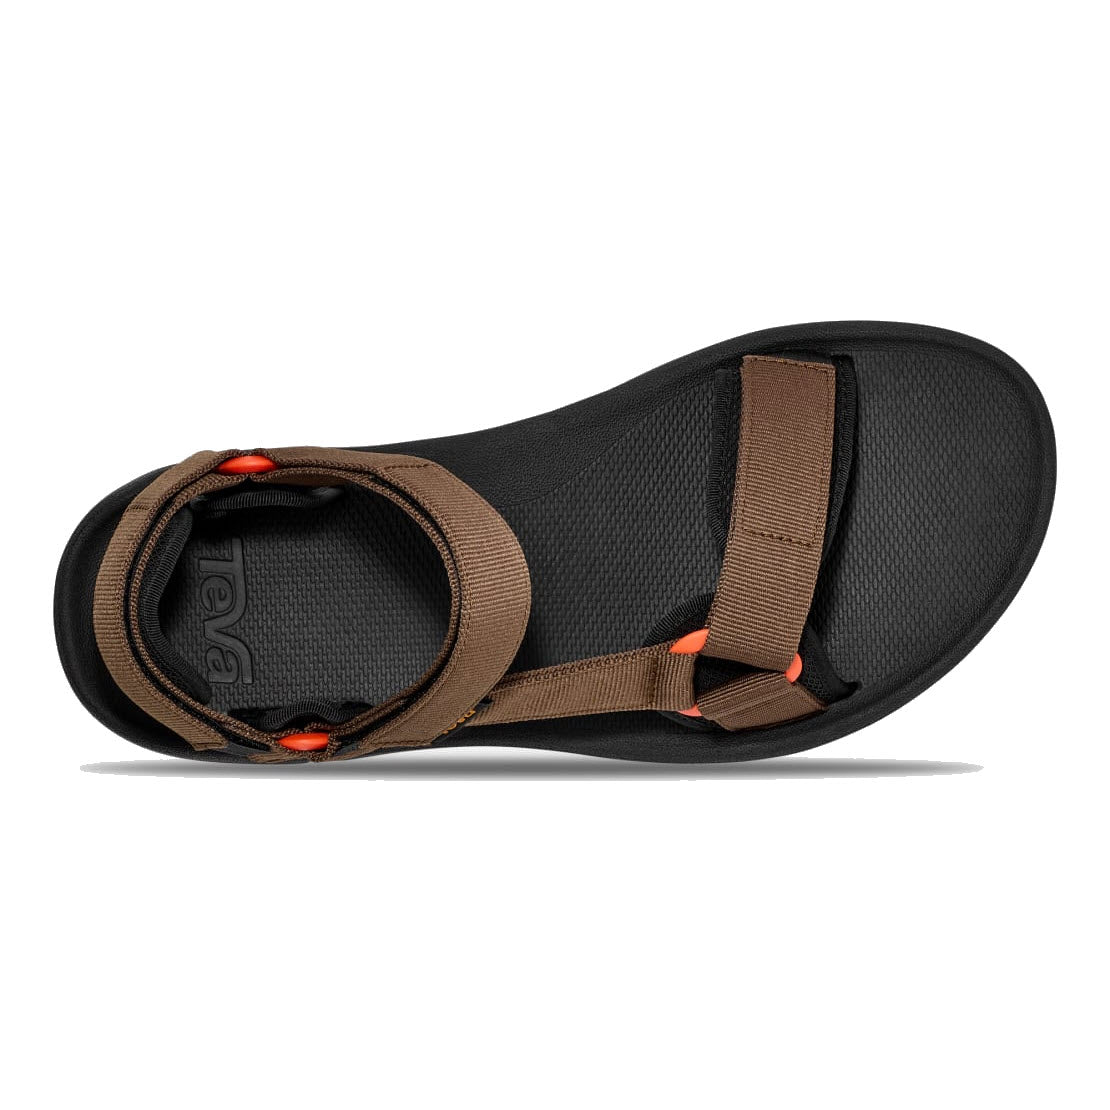 A single brown and black Teva Terragrip Sandal Desert Palm - Mens with adjustable straps, viewed from above against a white background.